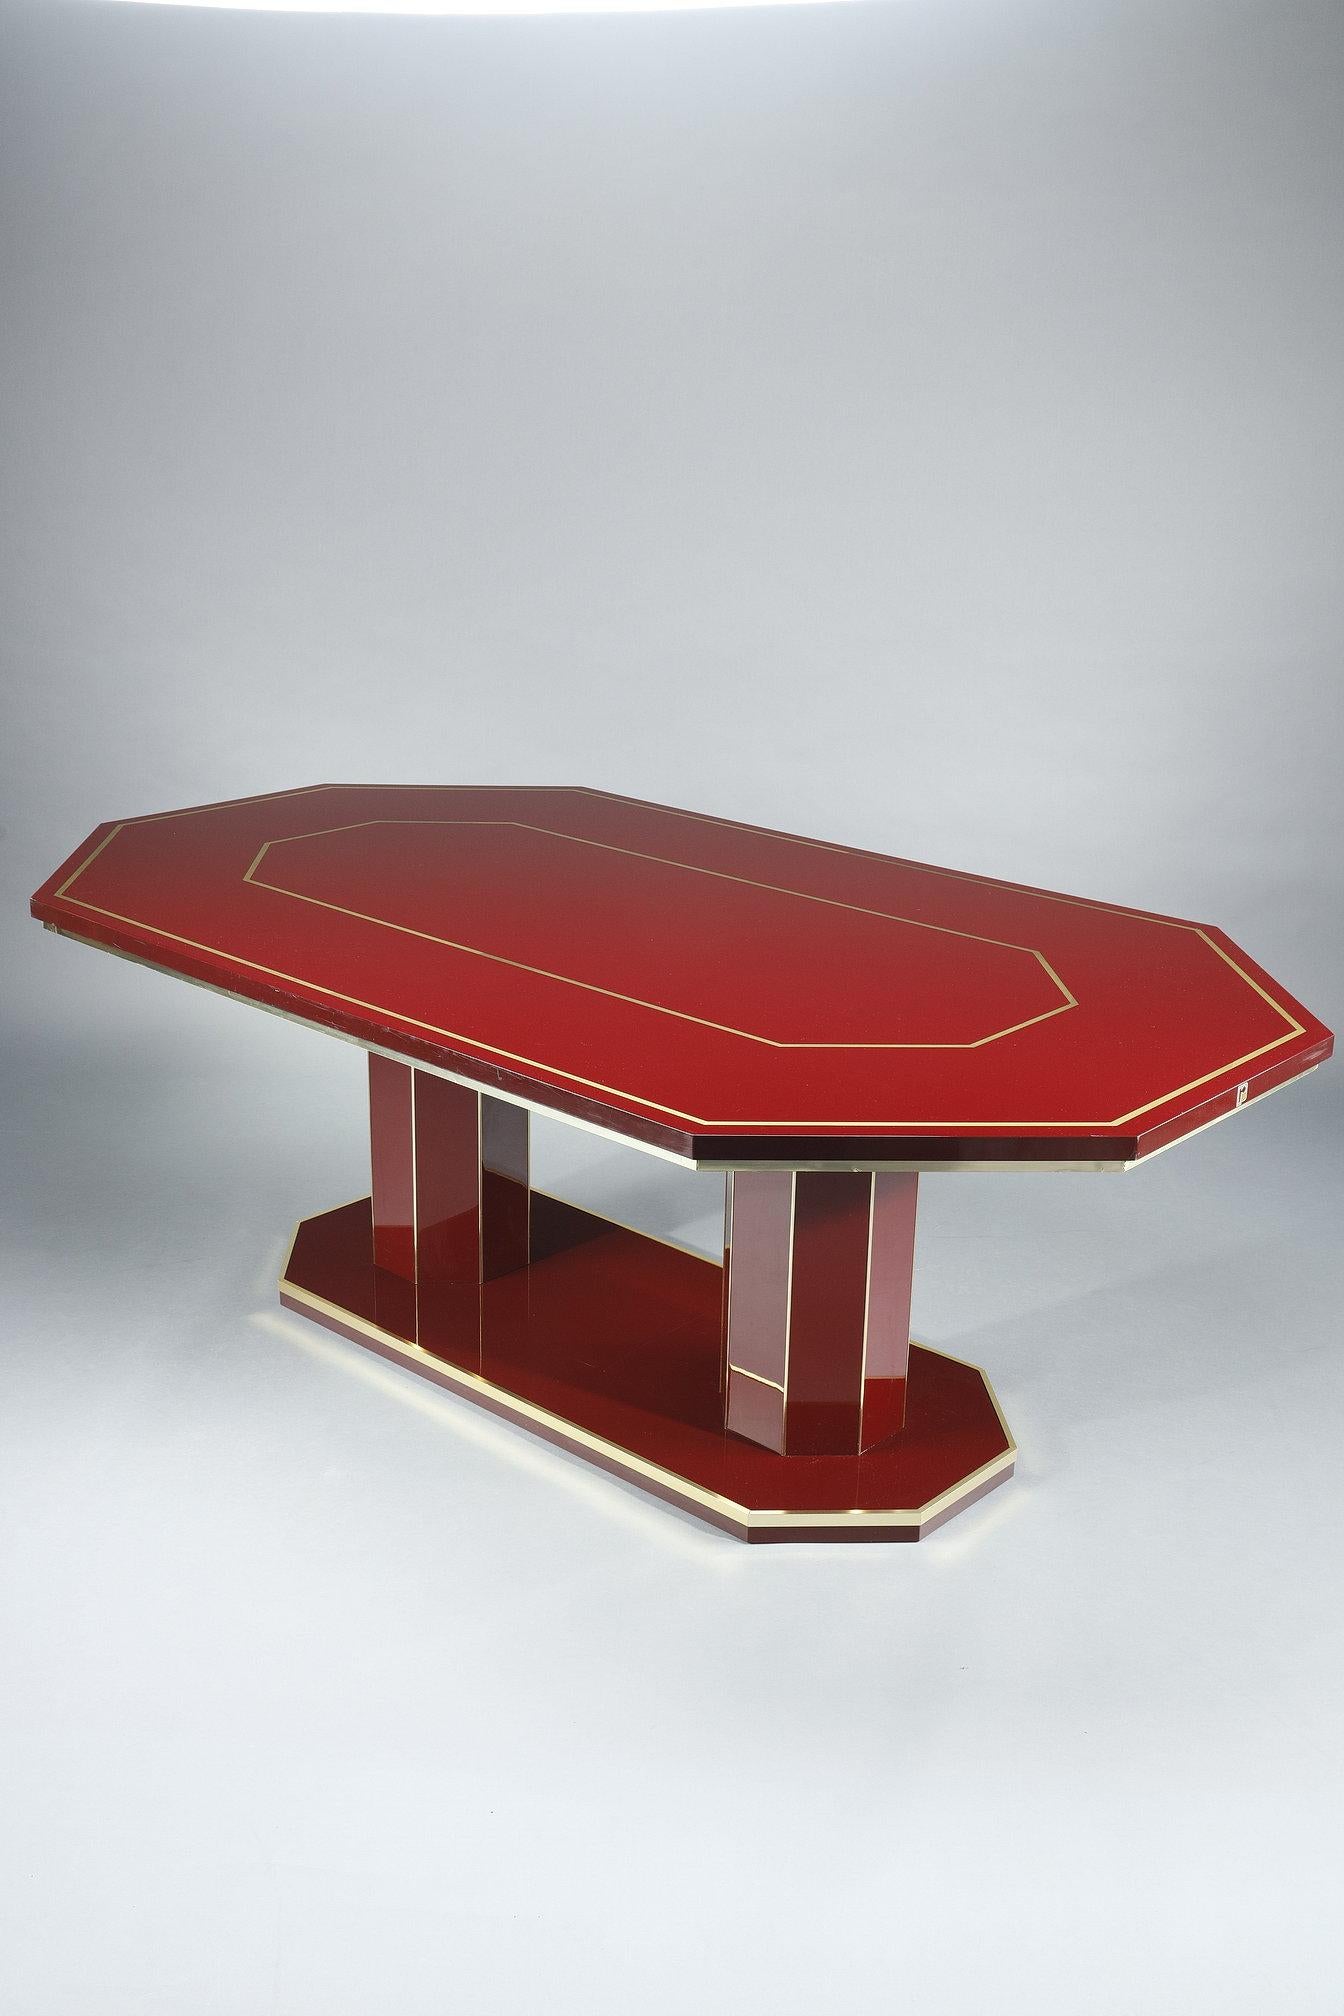 Dining table by designer Paco Rabanne (1934-2023) published in the 1970s. This octagonal-shaped dining table features a top, base and two legs in burgundy lacquered wood, elegantly highlighted by gilded brass angle irons. This timelessly designed